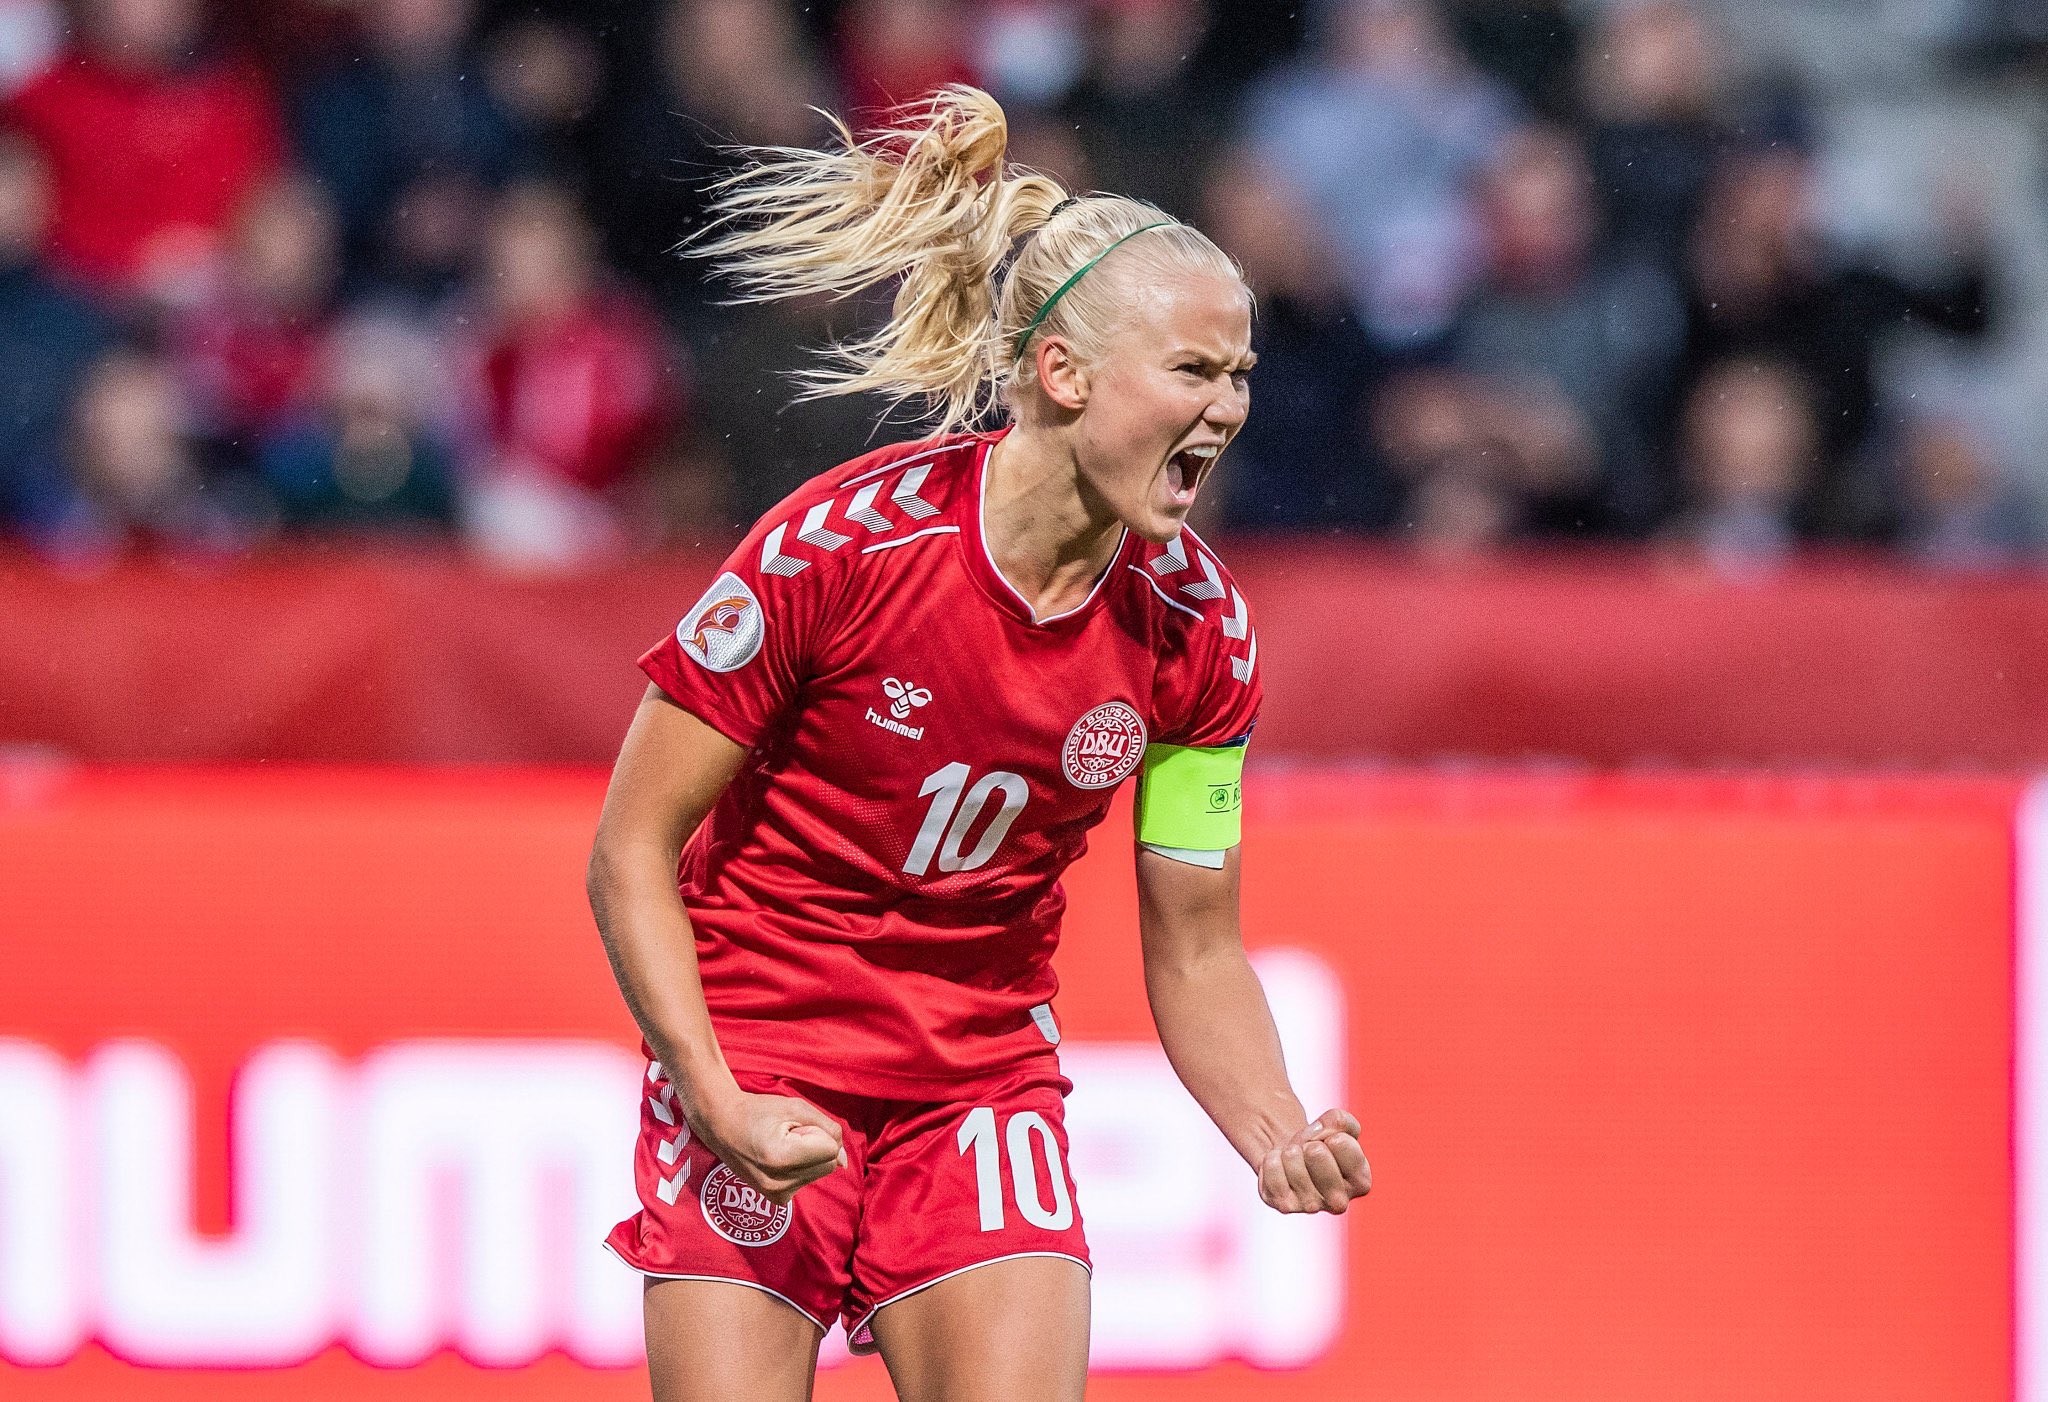 Pernille Harder ar Twitter: "Feeling so proud being nominated for the best  footballer of the year in Denmark. It's always a proud moment for me being  acknowledged for the hard work and